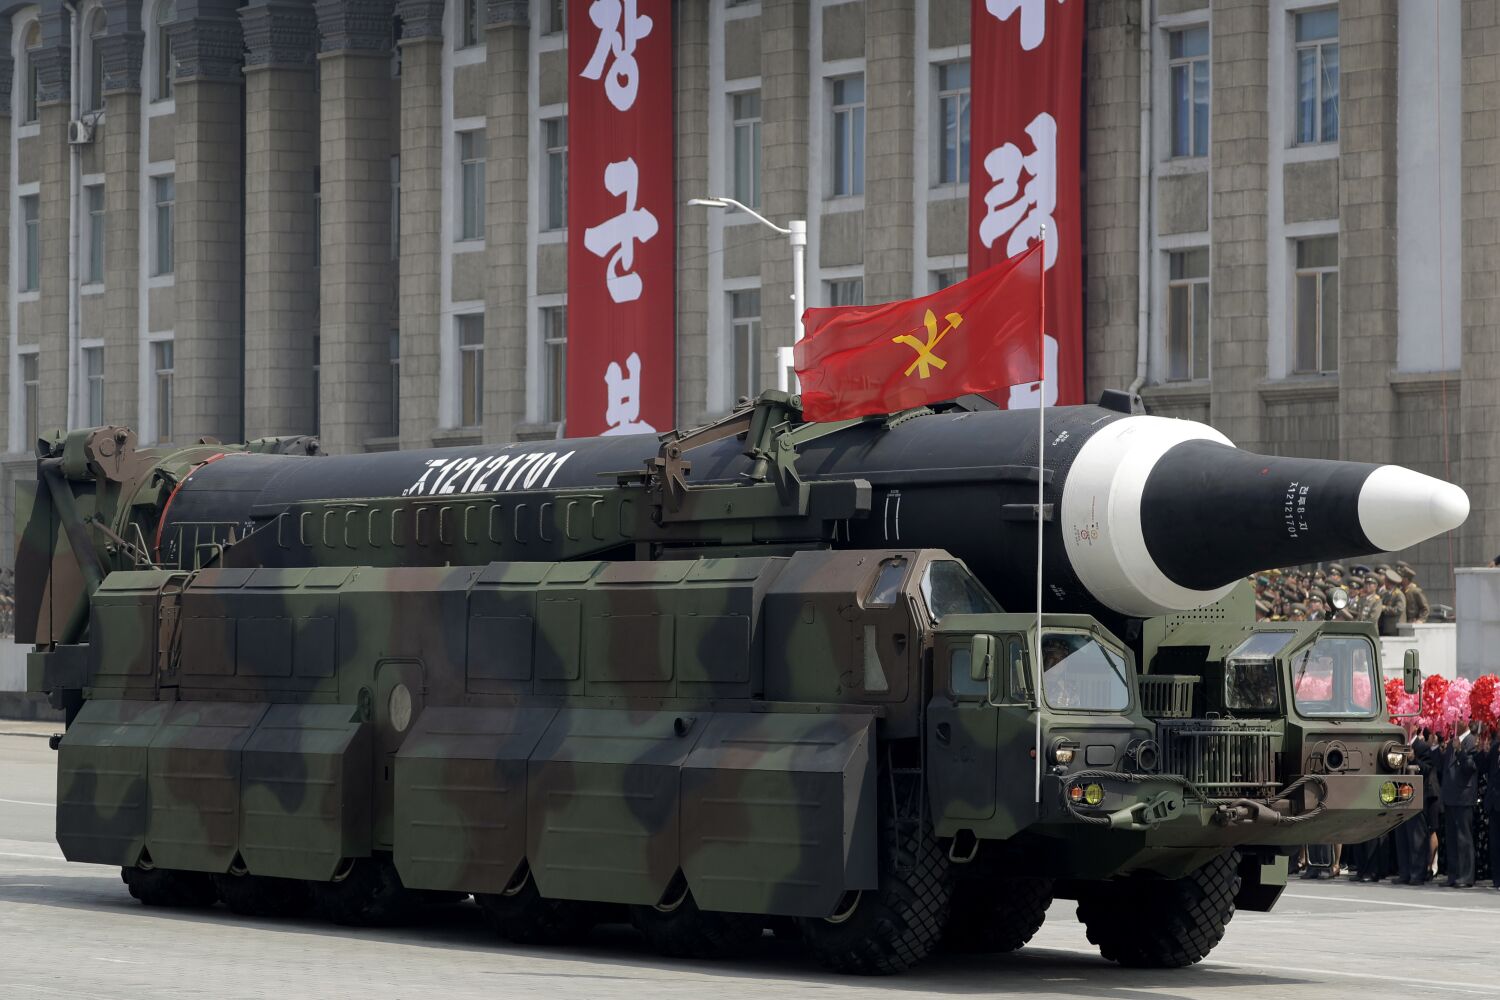 North Korea's latest missile test reminds the world of Asia's powder keg